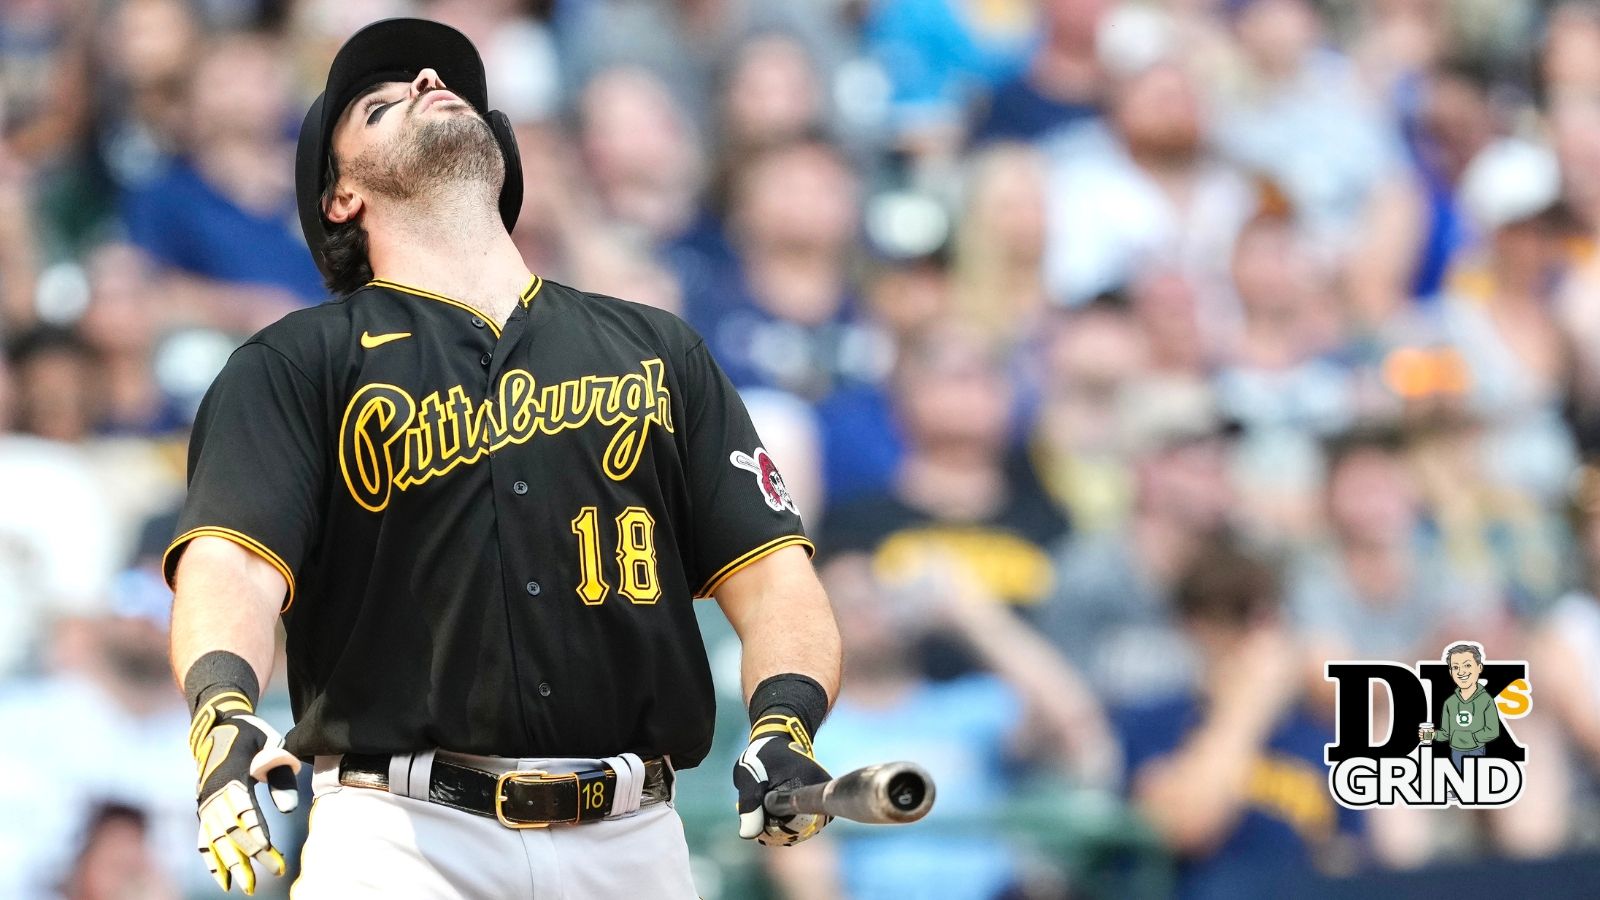 PBN Around the Horn: Who Could Fill in As an Opener For Pirates?